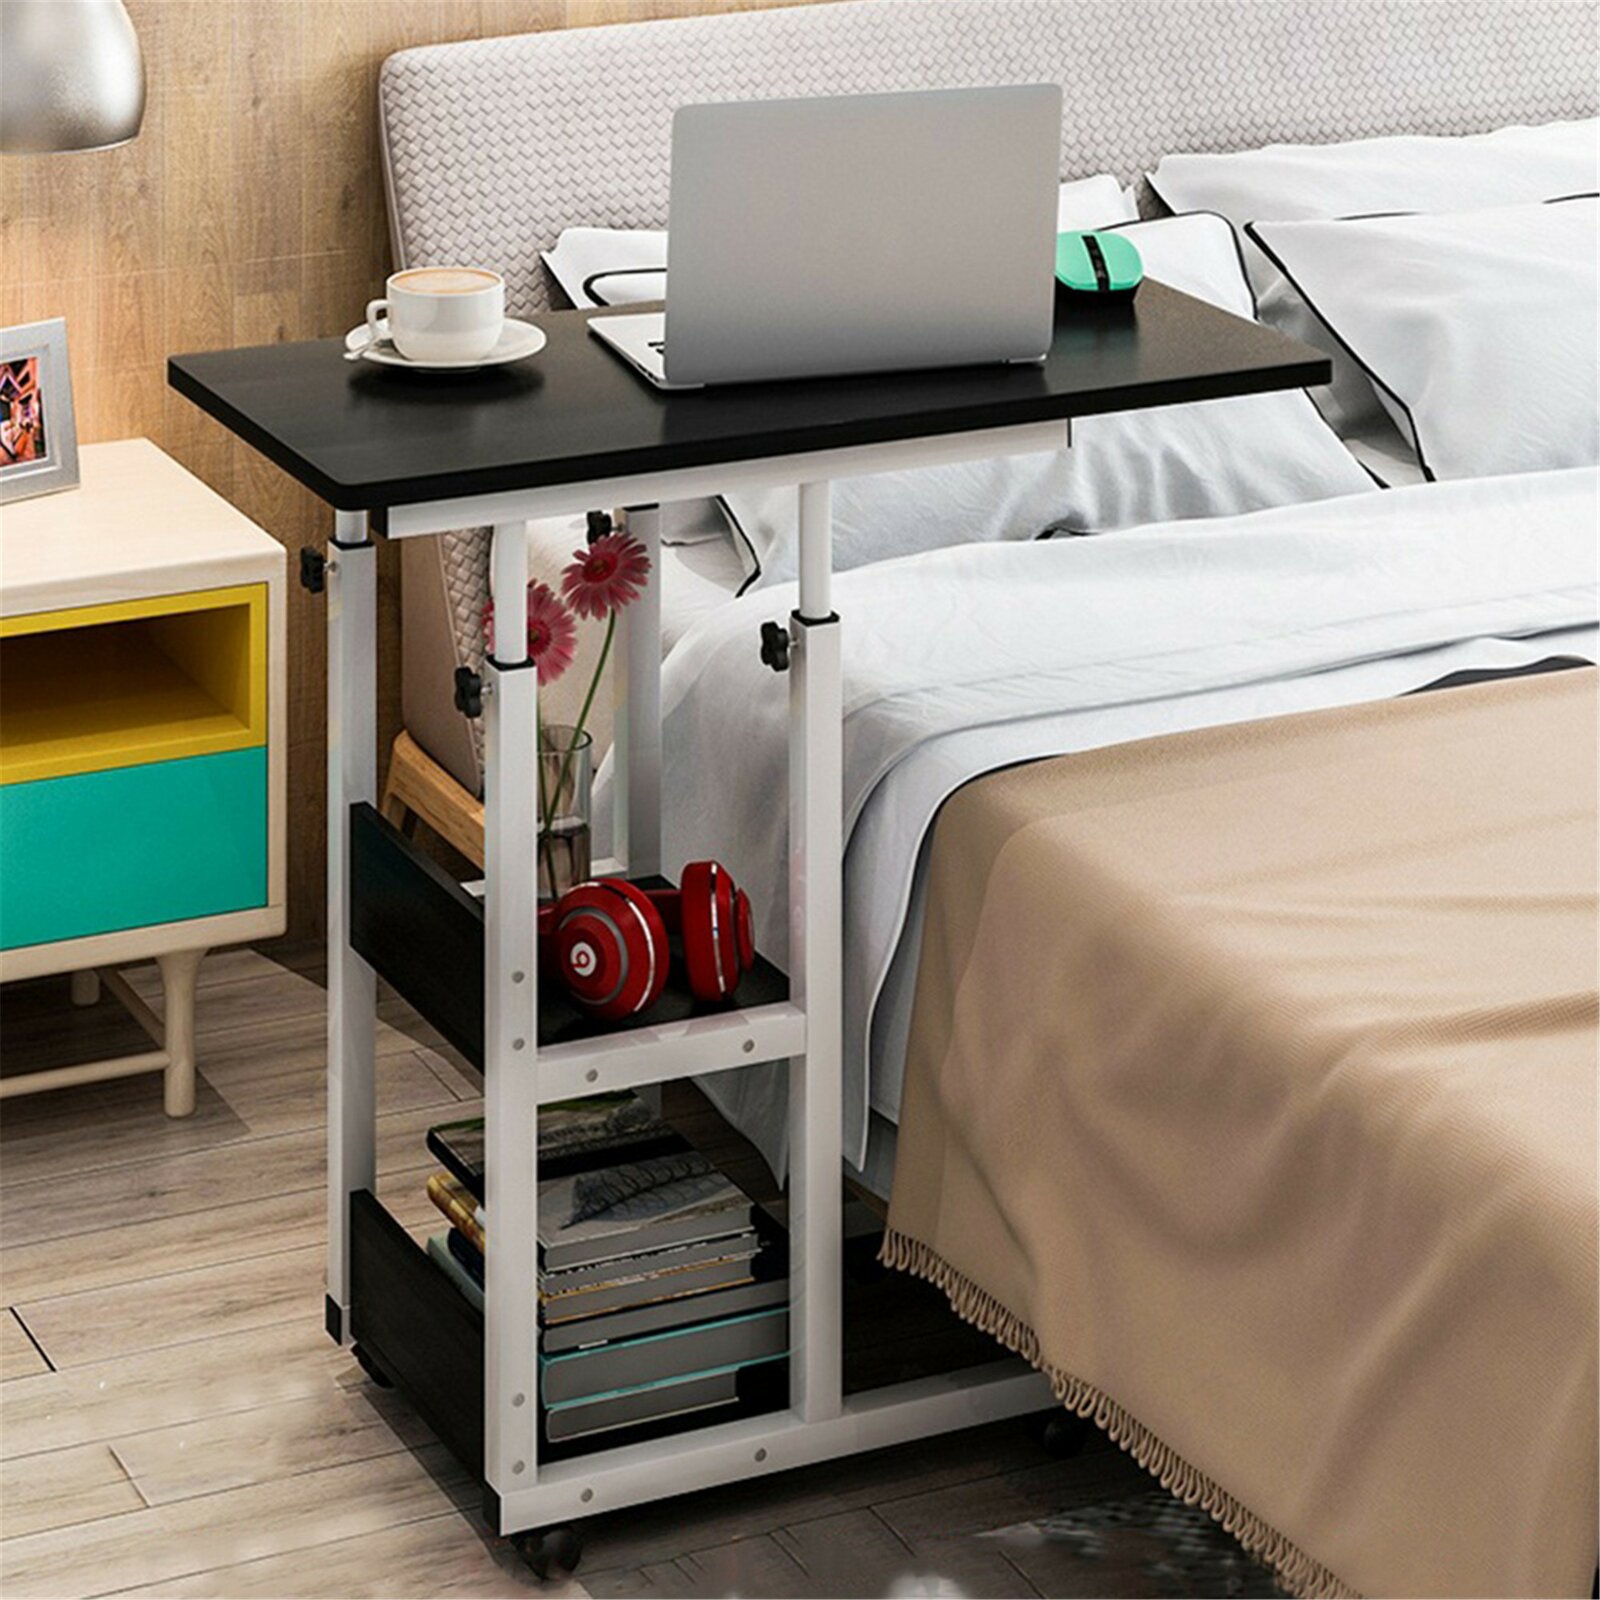 Portable height adjustable laptop tray